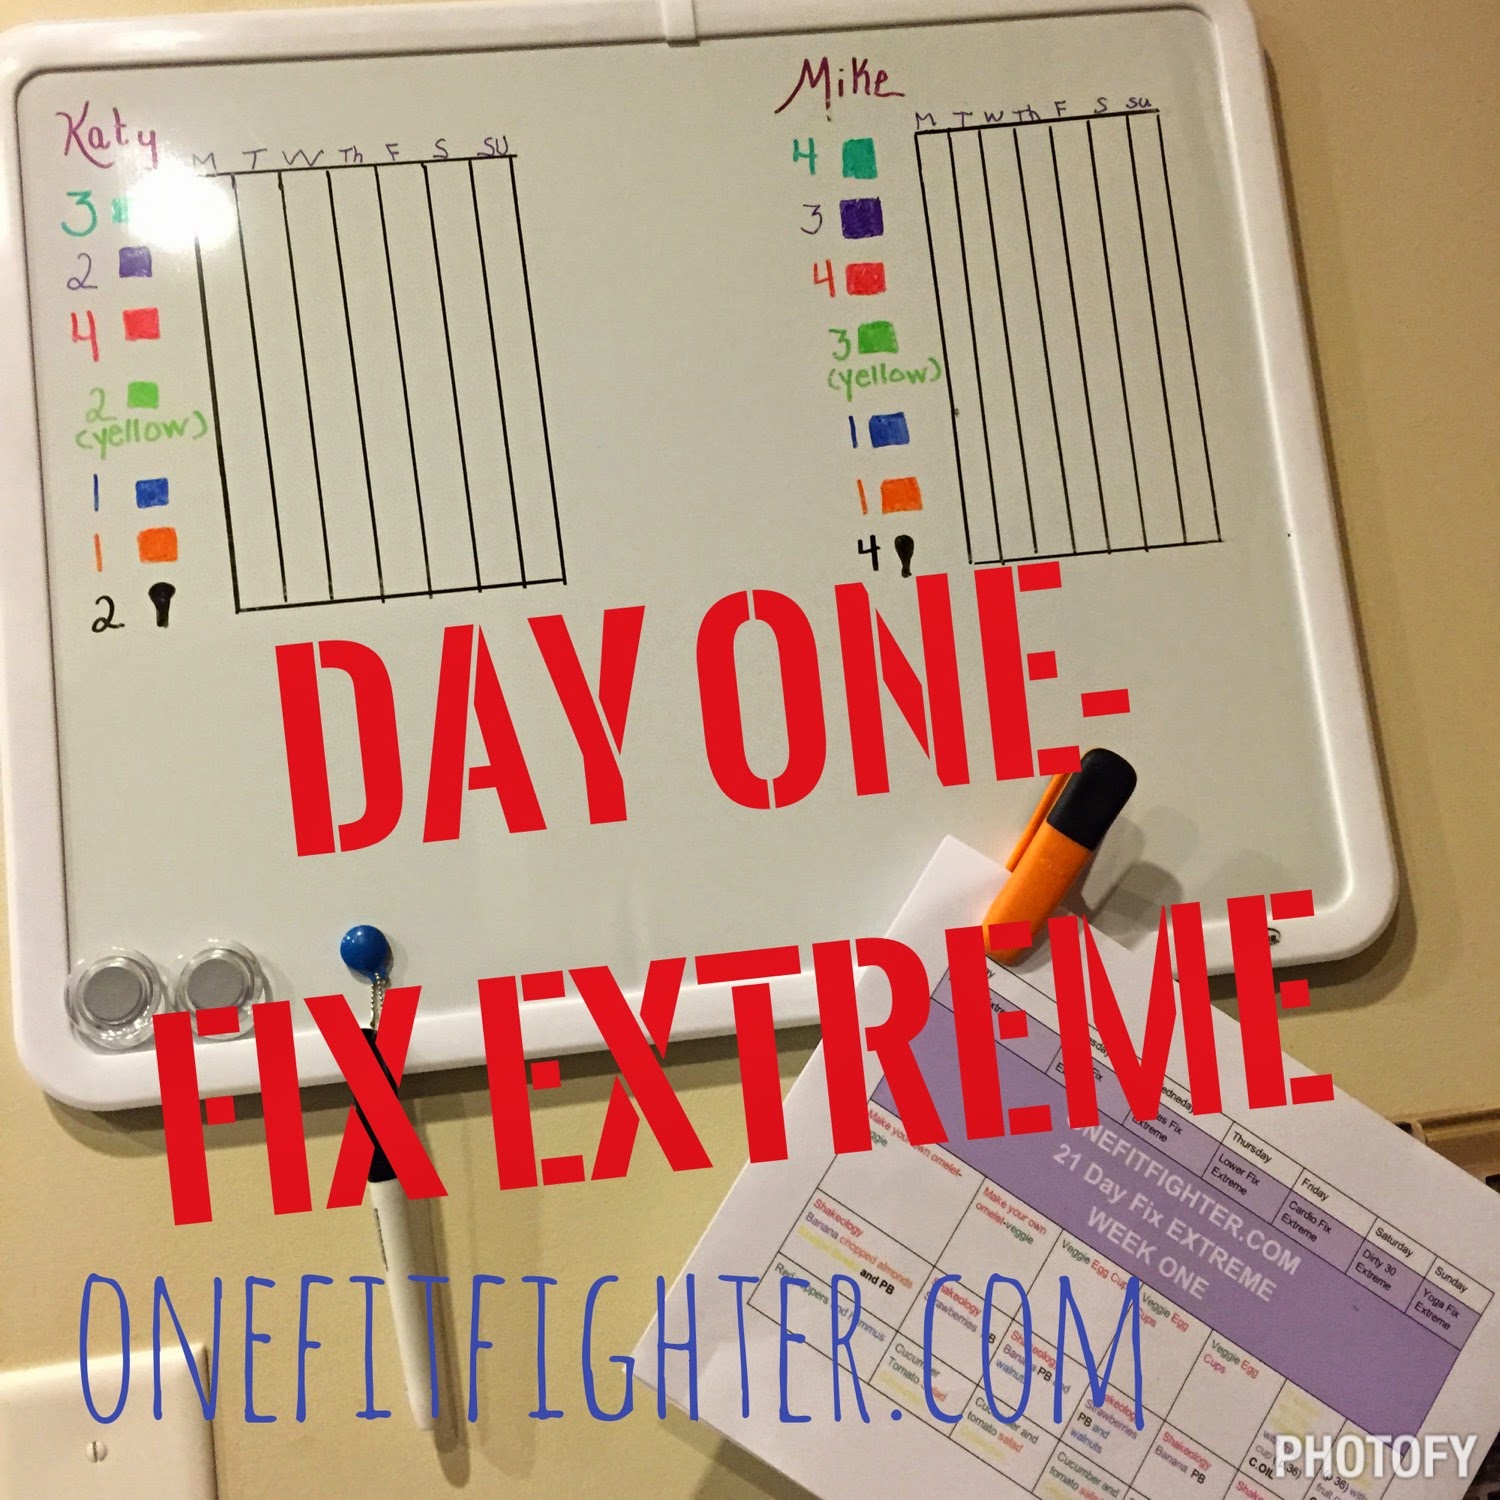 21 day fix extreme, 21 day fix, 21 day fix extreme testimonial, 21 day fix meal plans